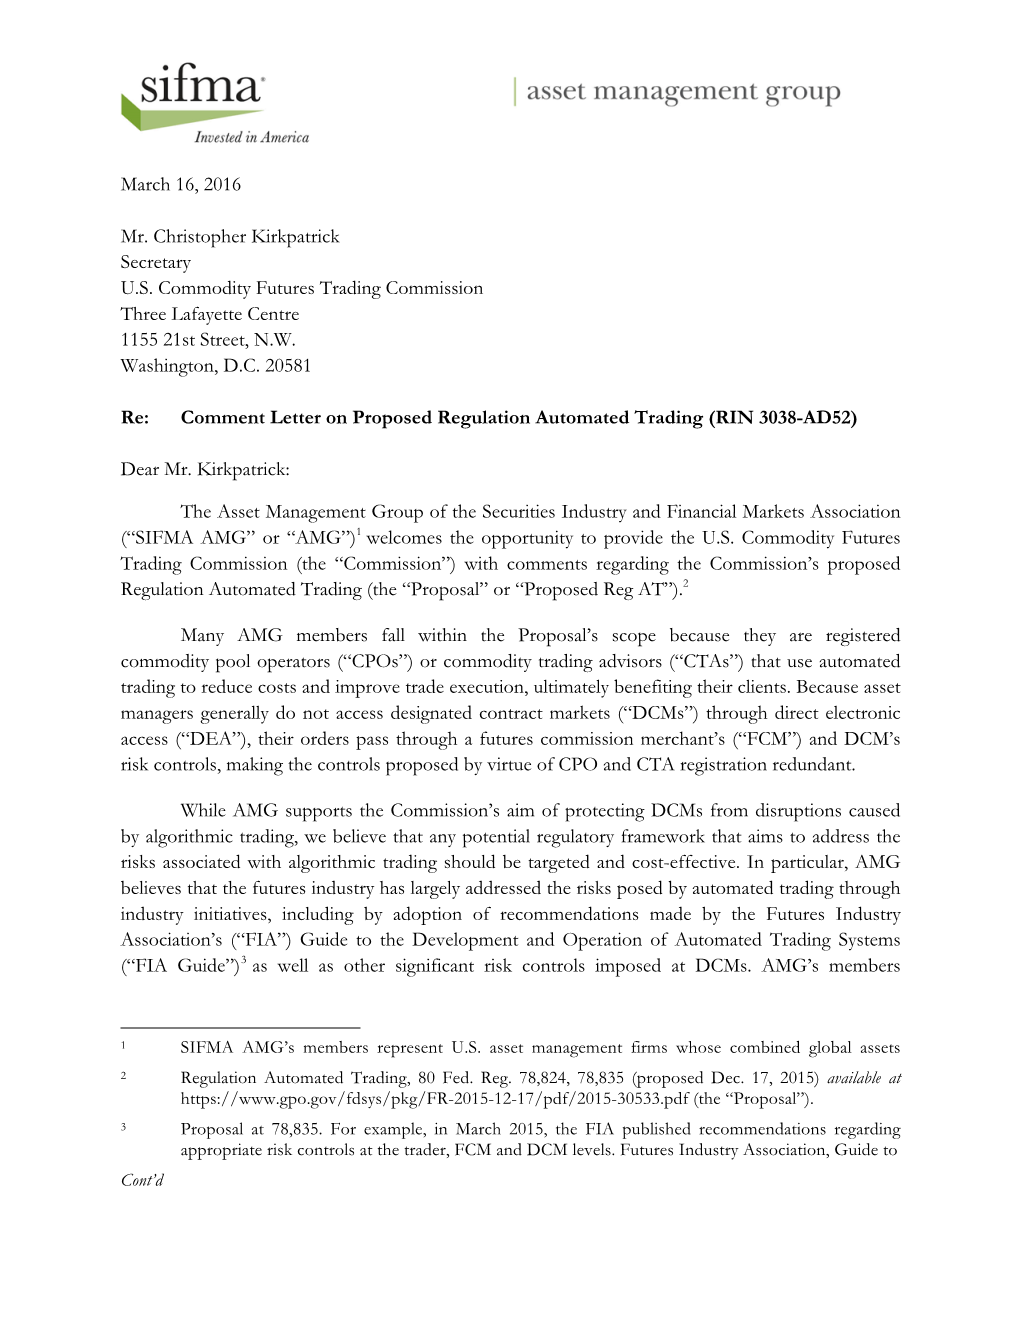 SIFMA AMG Submits Comments to the CFTC on Proposed Regulation